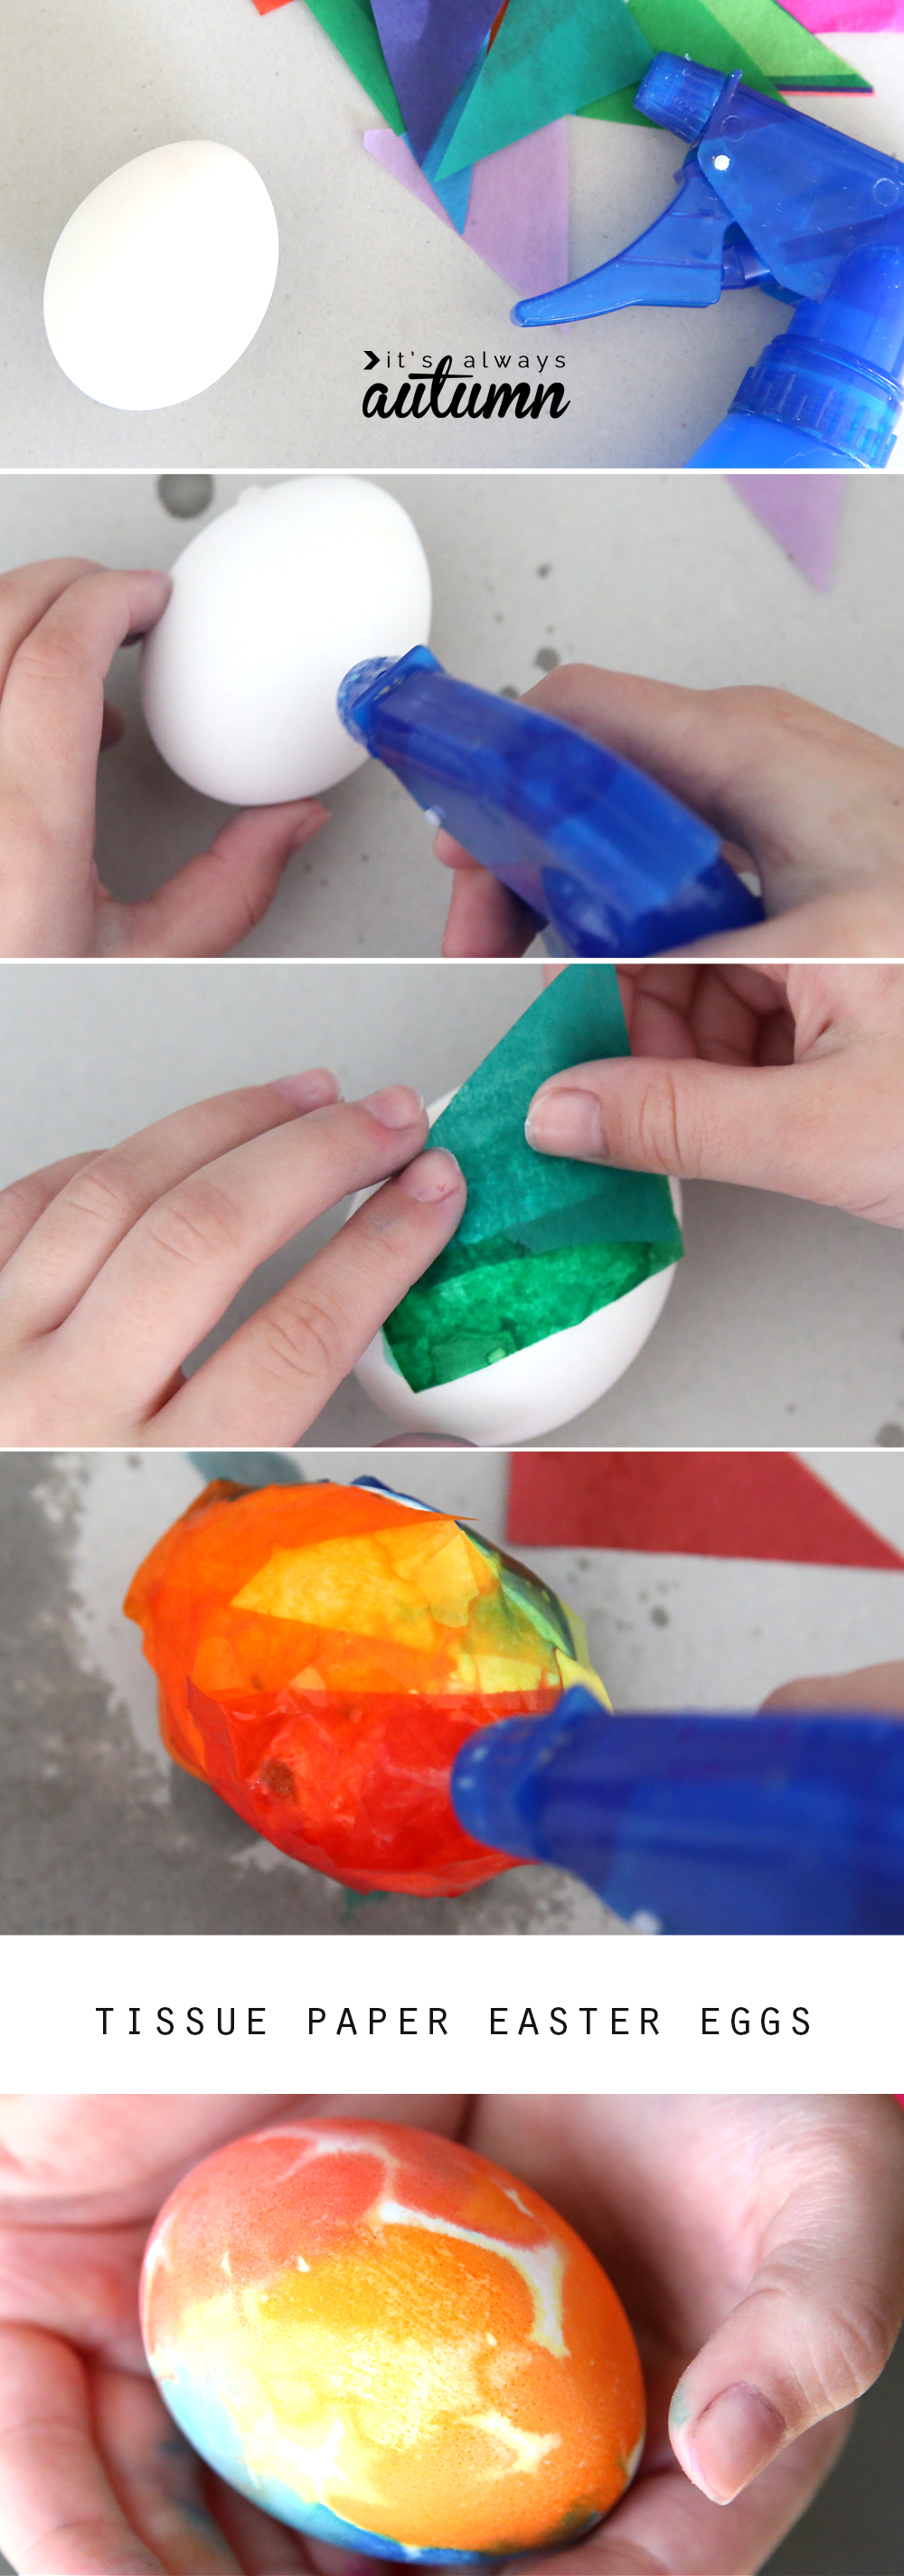 Hand placing pieces of tissue paper on Easter eggs sprayed with water